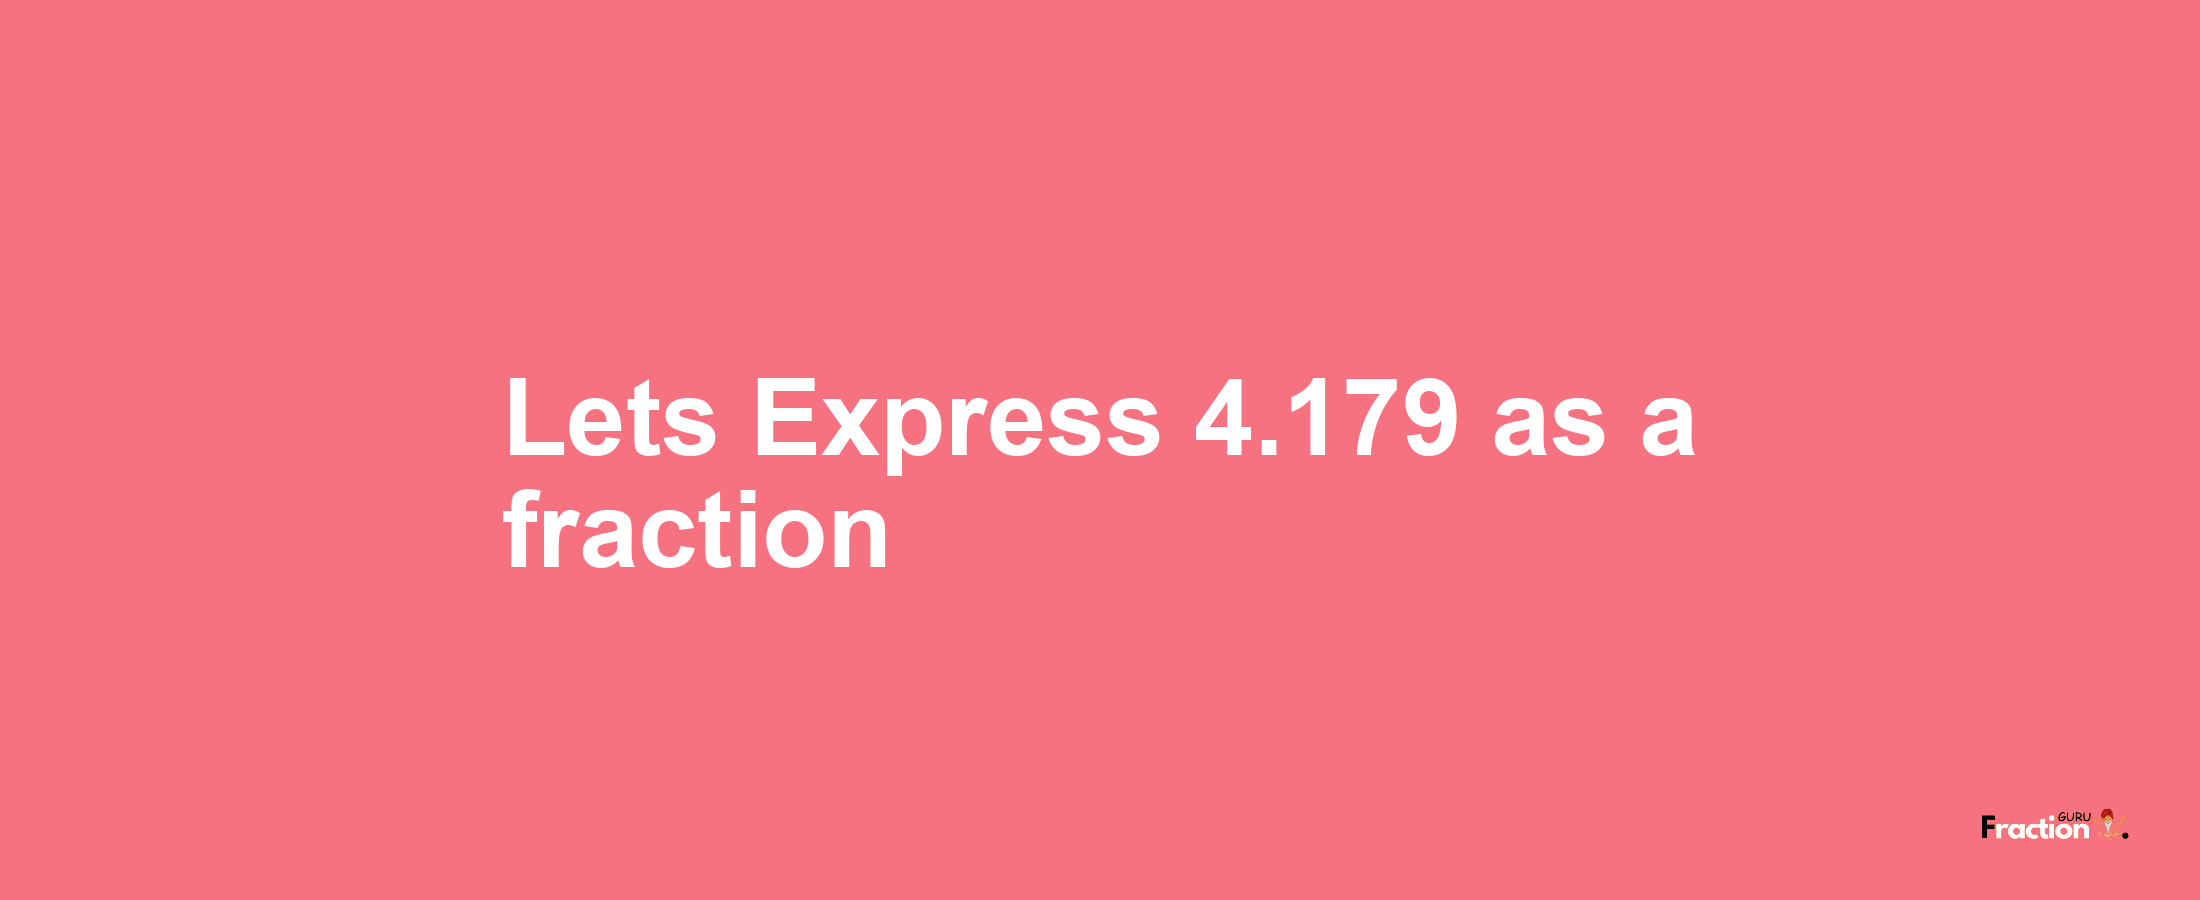 Lets Express 4.179 as afraction